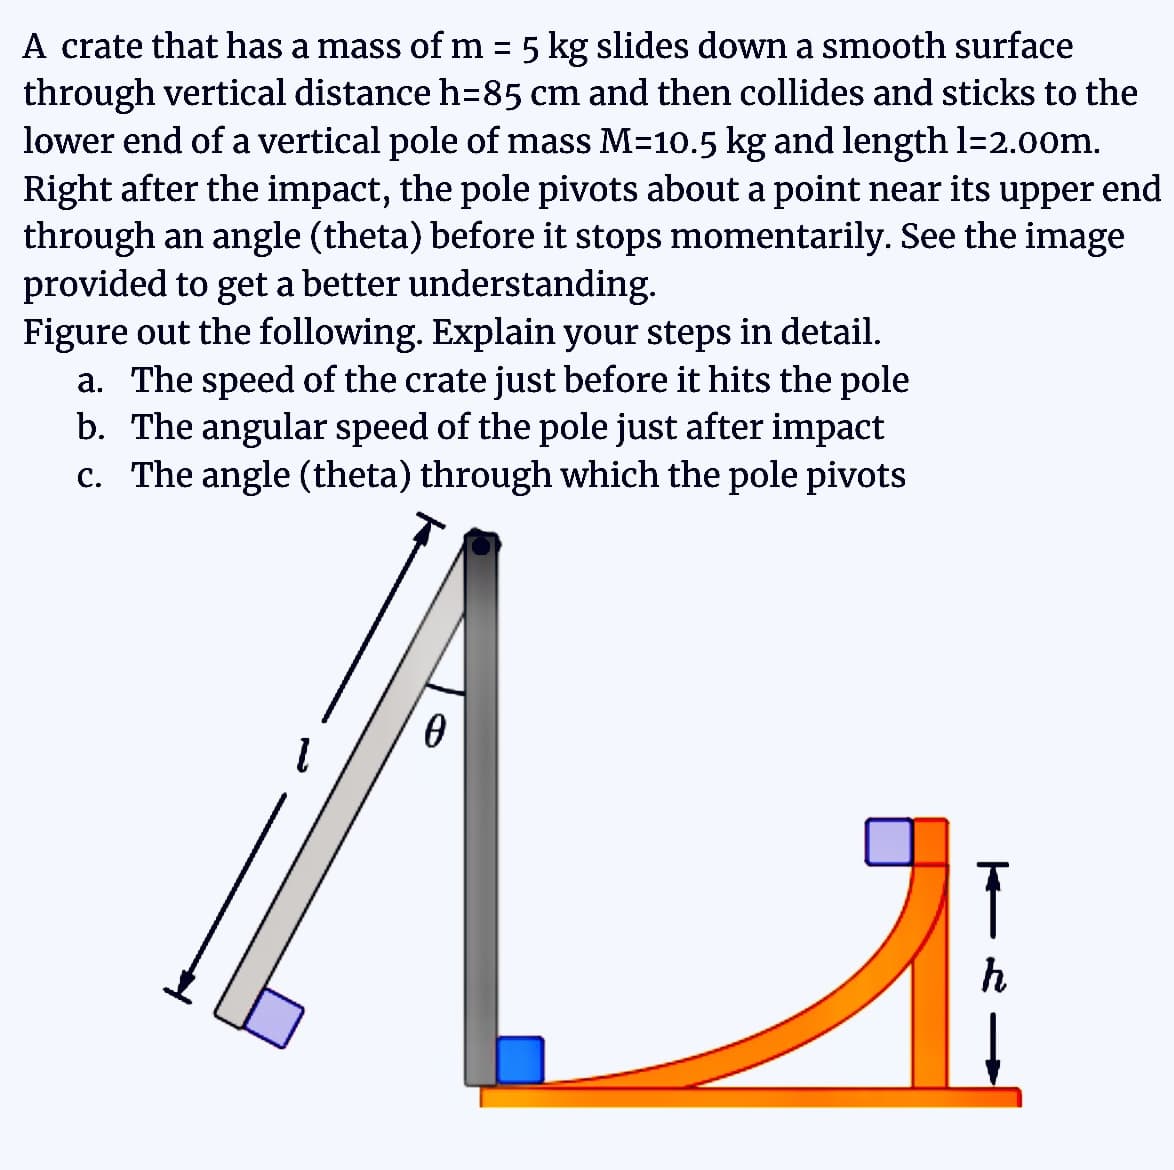 A crate that has a mass of m = 5 kg slides down a smooth surface
through vertical distance h=85 cm and then collides and sticks to the
lower end of a vertical pole of mass M-10.5 kg and length 1-2.00m.
Right after the impact, the pole pivots about a point near its upper end
through an angle (theta) before it stops momentarily. See the image
provided to get a better understanding.
Figure out the following. Explain your steps in detail.
a. The speed of the crate just before it hits the pole
b. The angular speed of the pole just after impact
c. The angle (theta) through which the pole pivots
0
A
TR
h